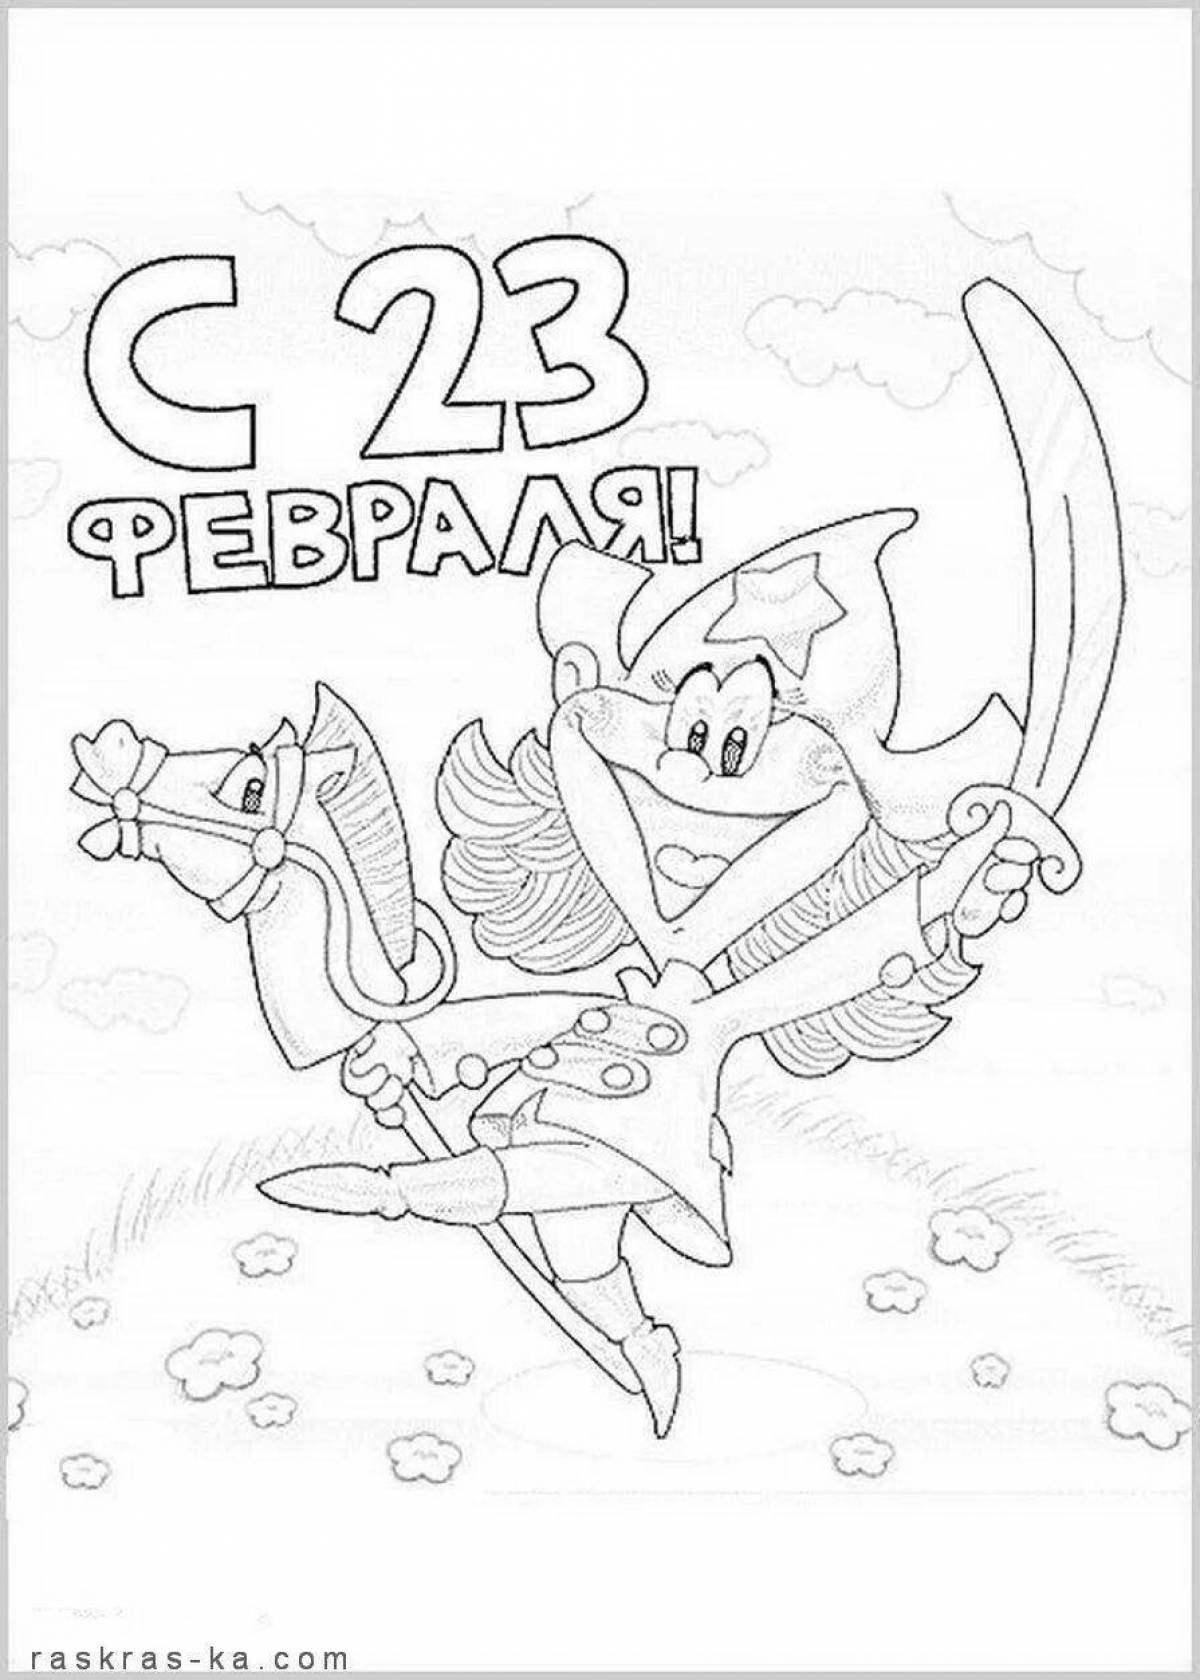 Adorable coloring book February 23